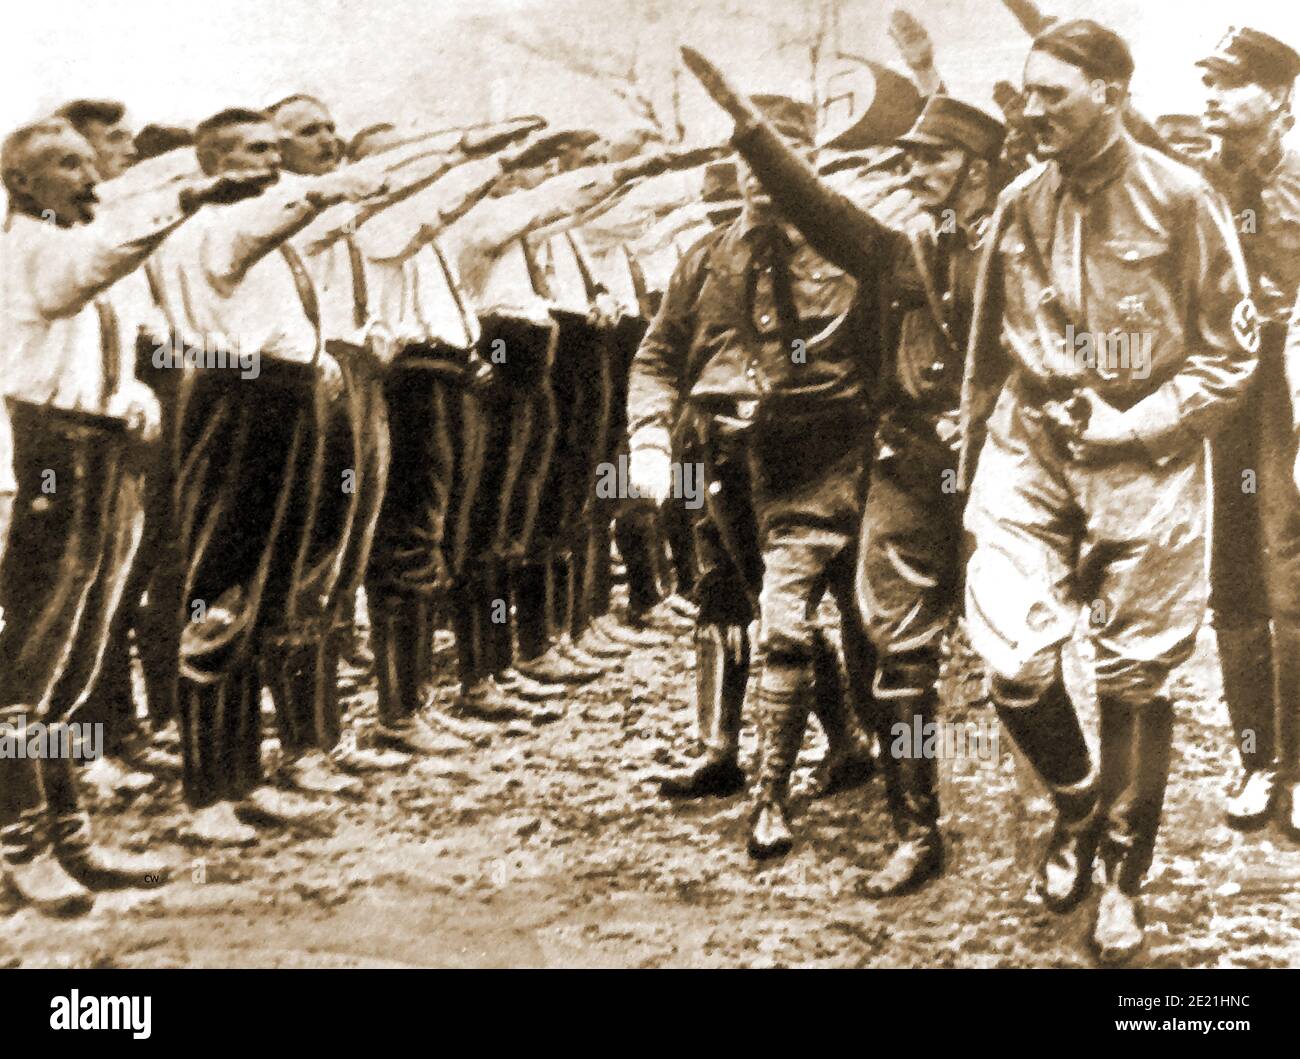 Adolph Hitler inspecting his new 'Brown Shirts' in 1930 -(from a press picture of the time). They were also known as Braunhemden, Sturmabteilung, the SA, and Storm Detachment.  Their primary purpose was to  provide protection for Nazi rallies and other assemblies; and to disrupt  the meetings and gatherings of  any  opposing parties.The SA developed pseudo-military titles and ranks  for its members,   that were later adopted by several other Nazi Party groups. Their name comes from their standard mode of dress.(Rudolph Hess can be seem immediately to the right behind Hitler). Stock Photo